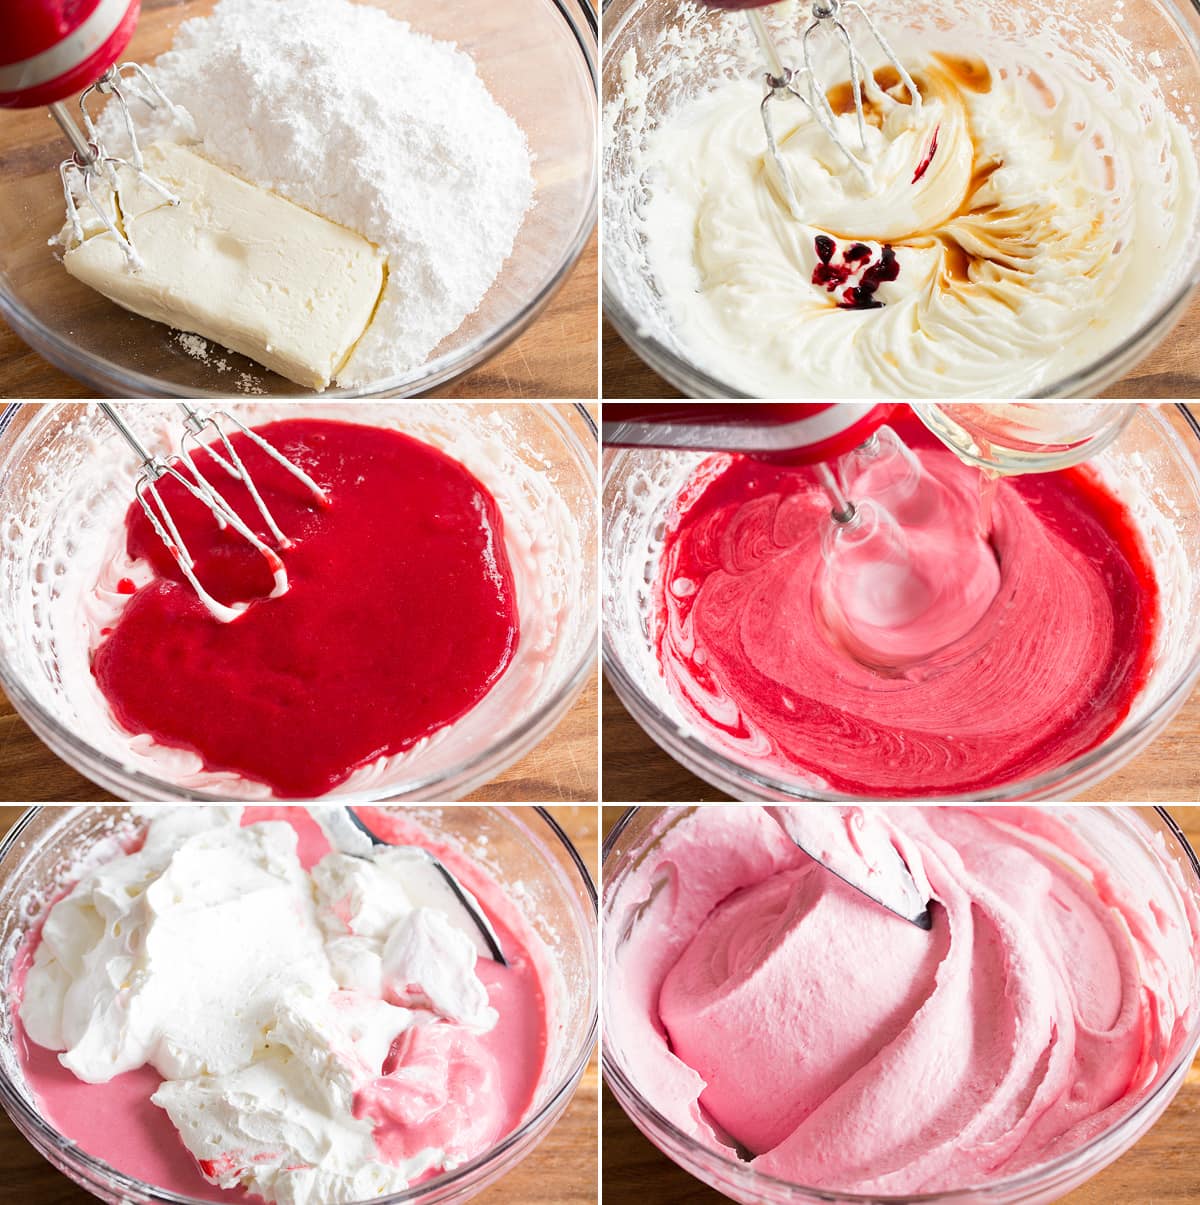 Collage of six images showing how to make the raspberry mousse mixture for icebox cake.